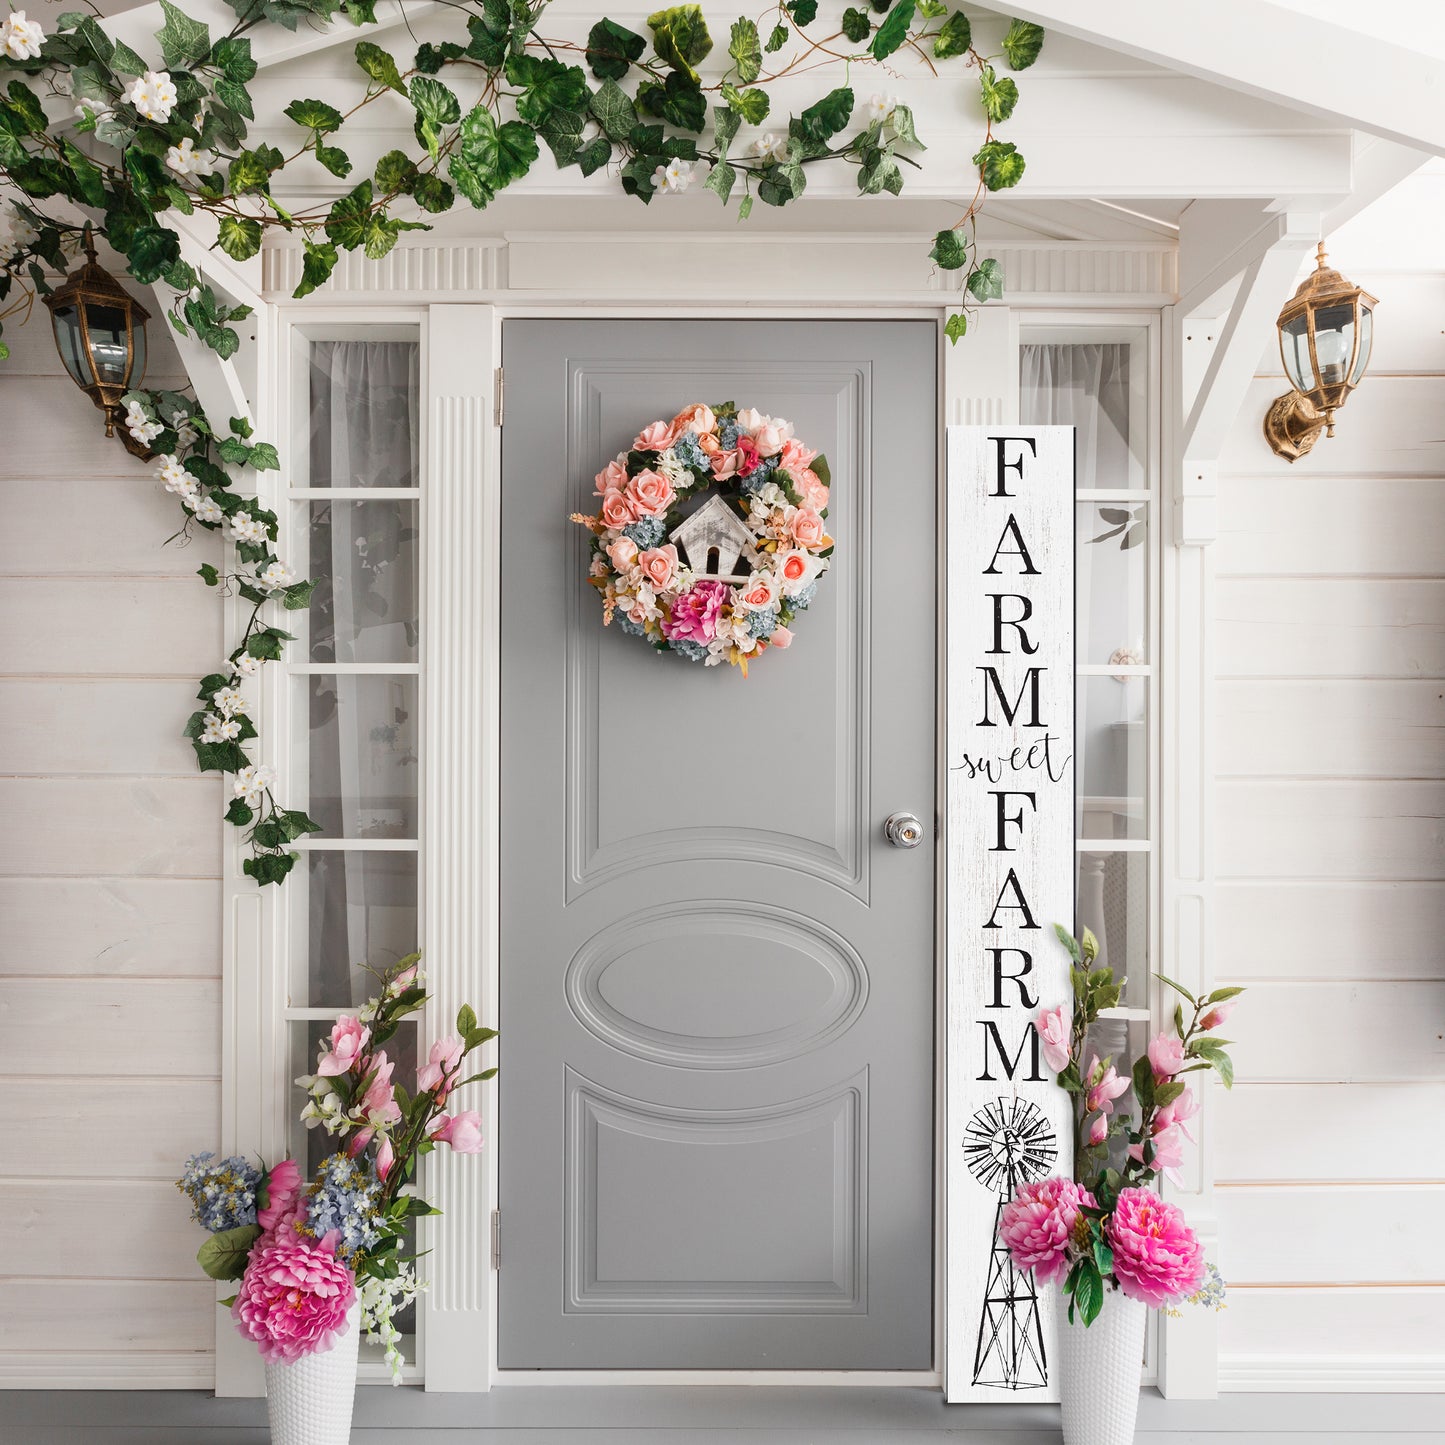 72in White 'Farm Sweet Farm' Welcome Porch Sign - Rustic Door & Outdoor Home Decor